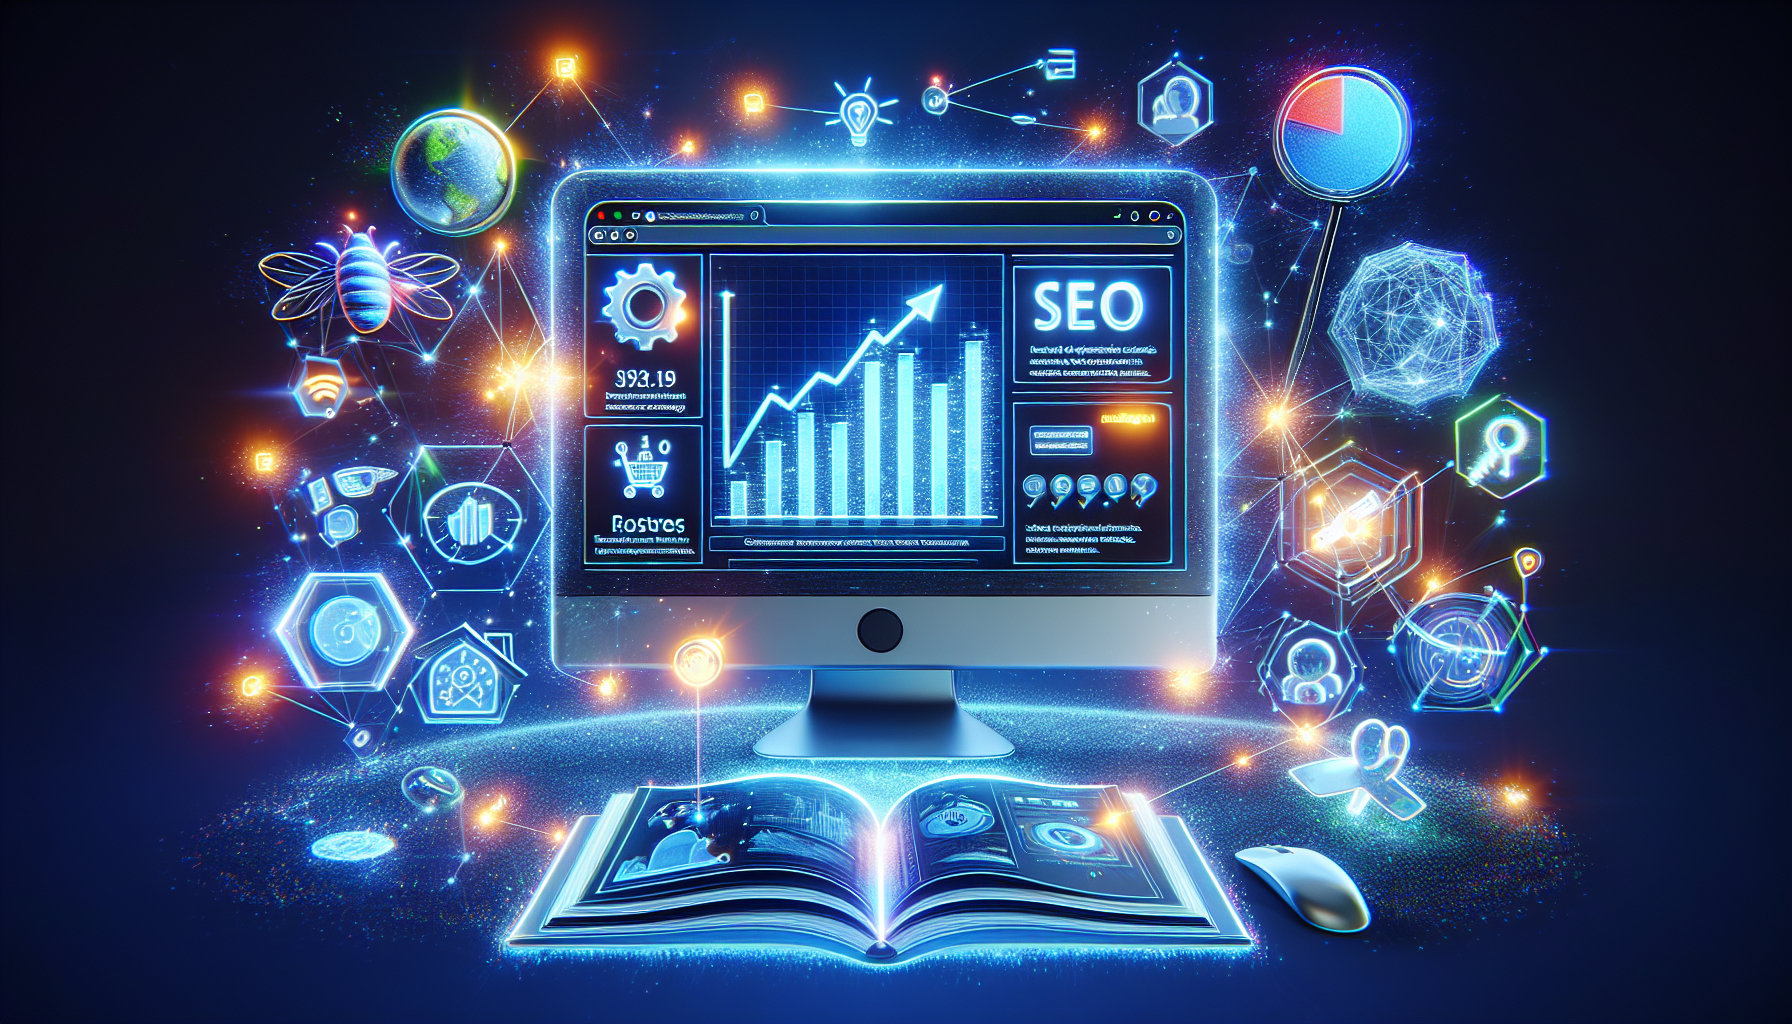 How to Use RankMath SEO Plugin to Improve Website Rankings